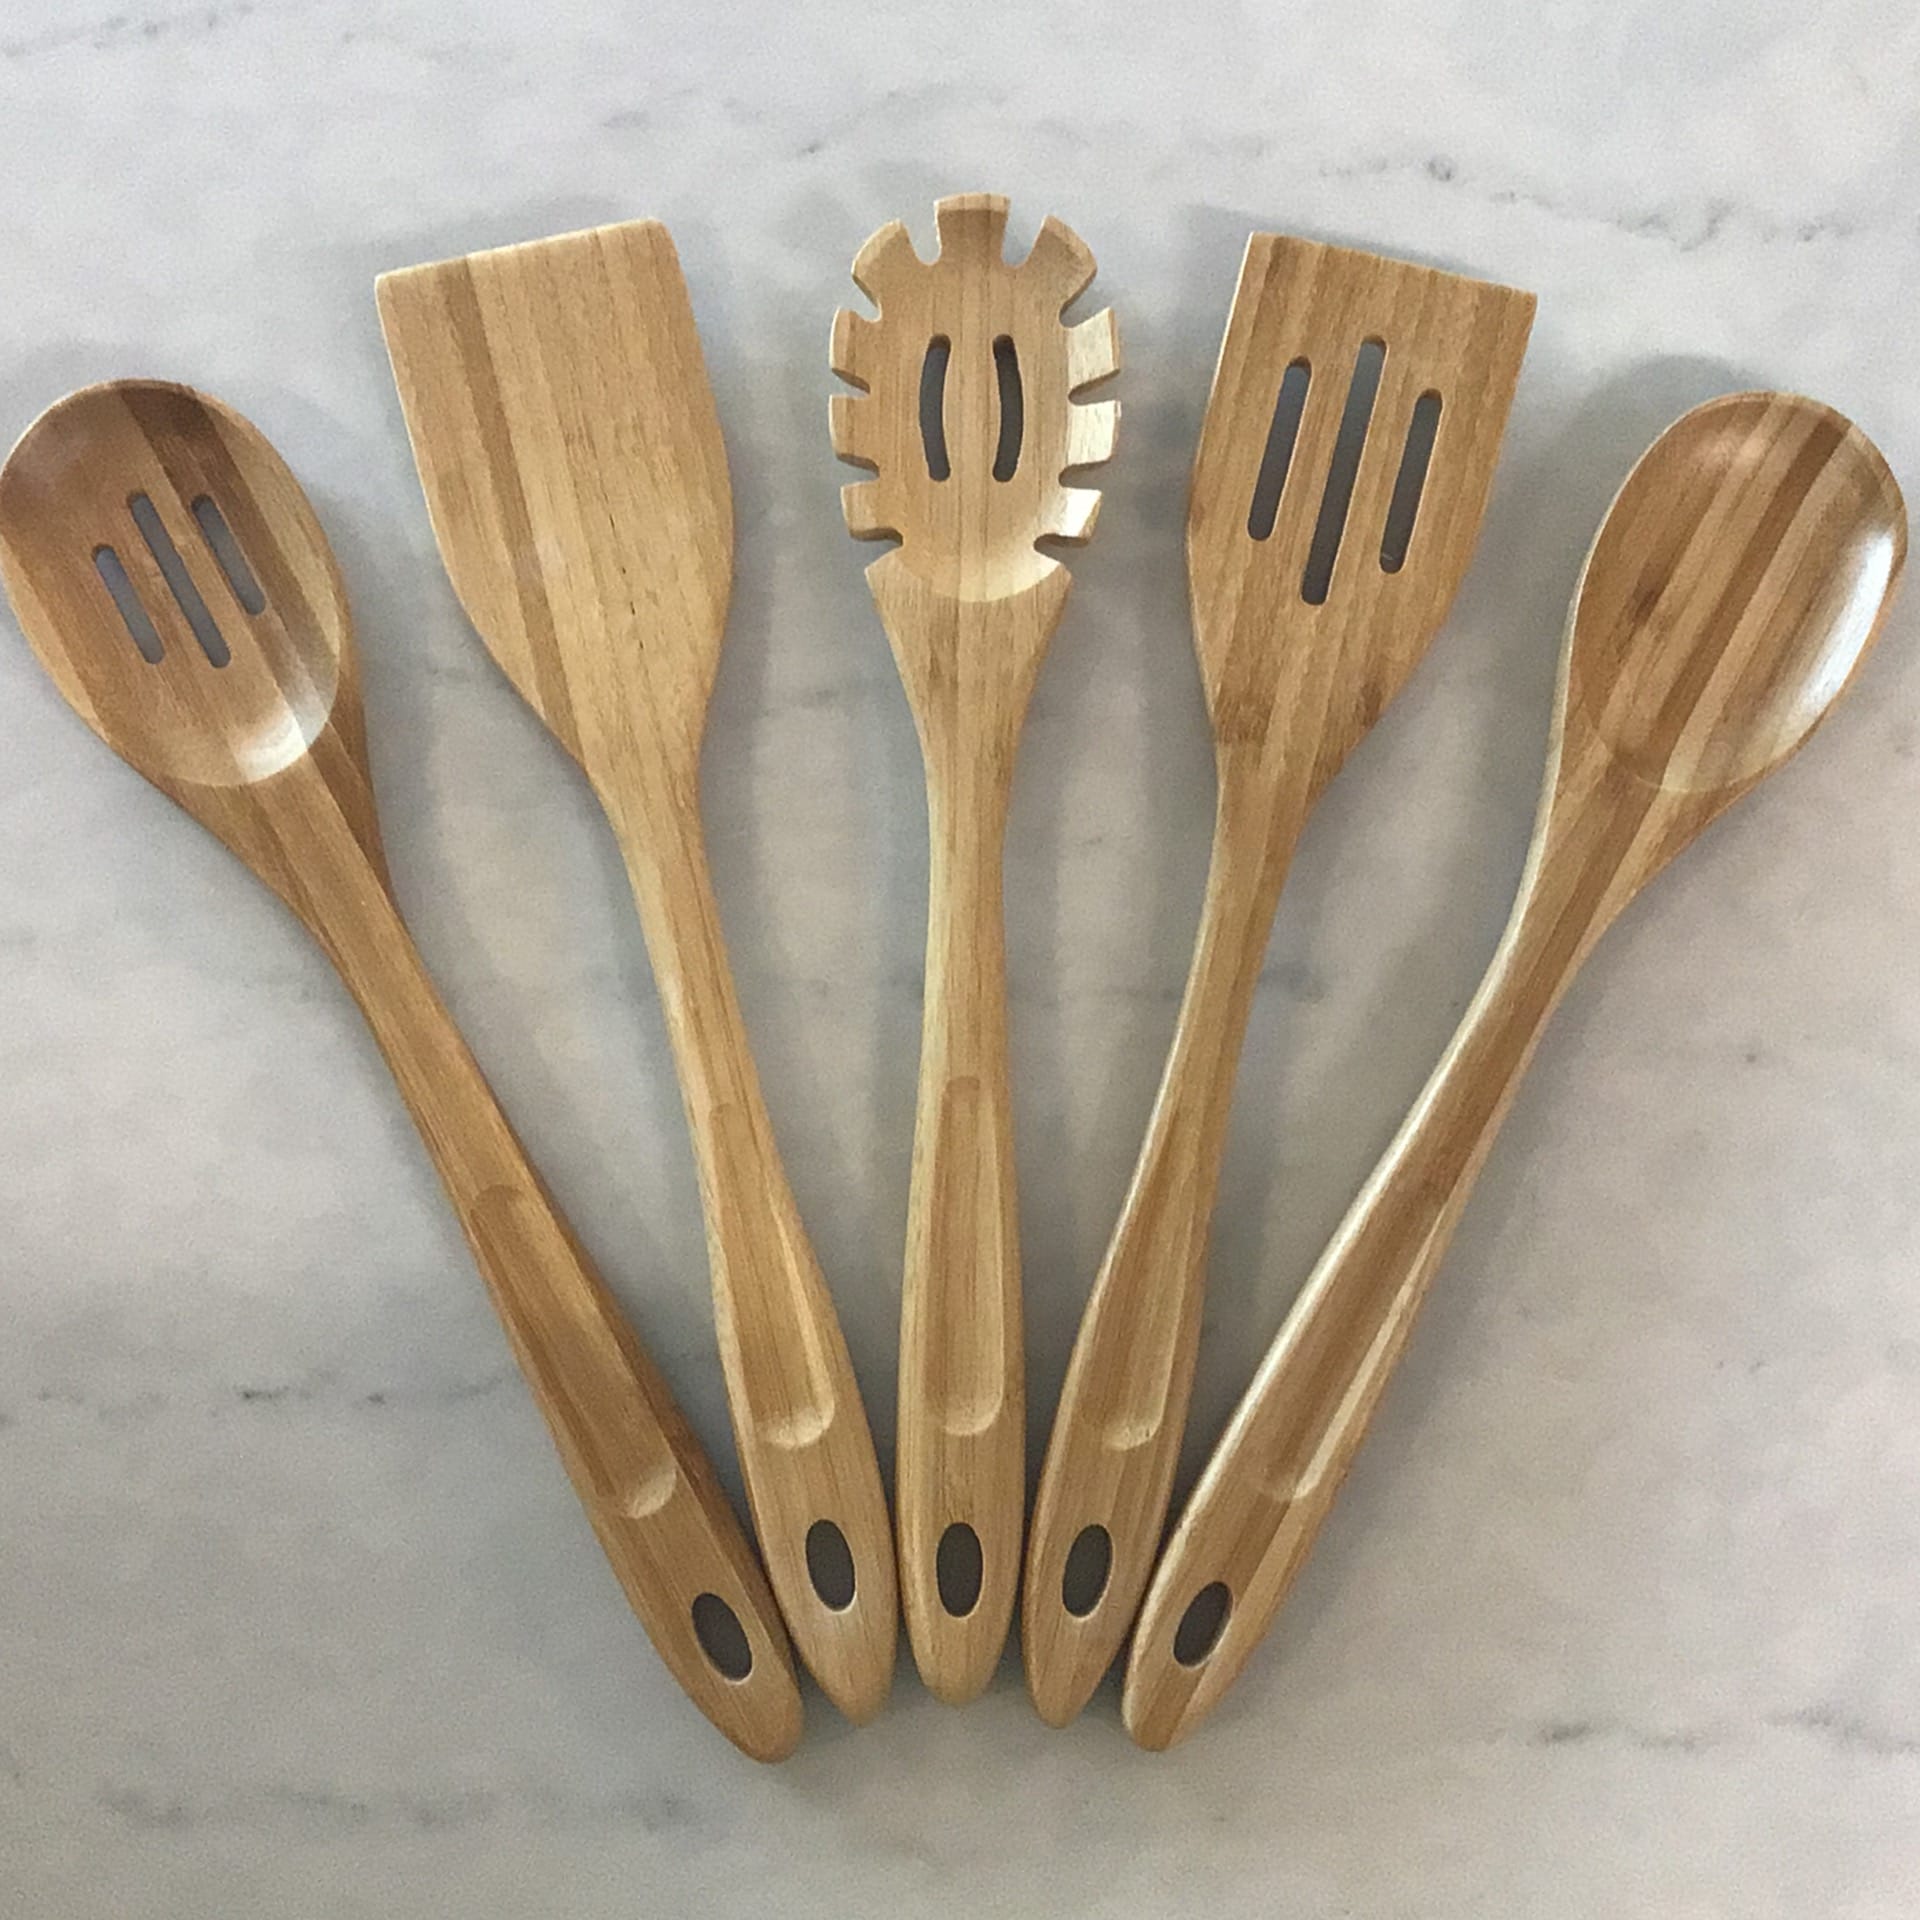 Bamboo Cooking Utensils and Prep Tools